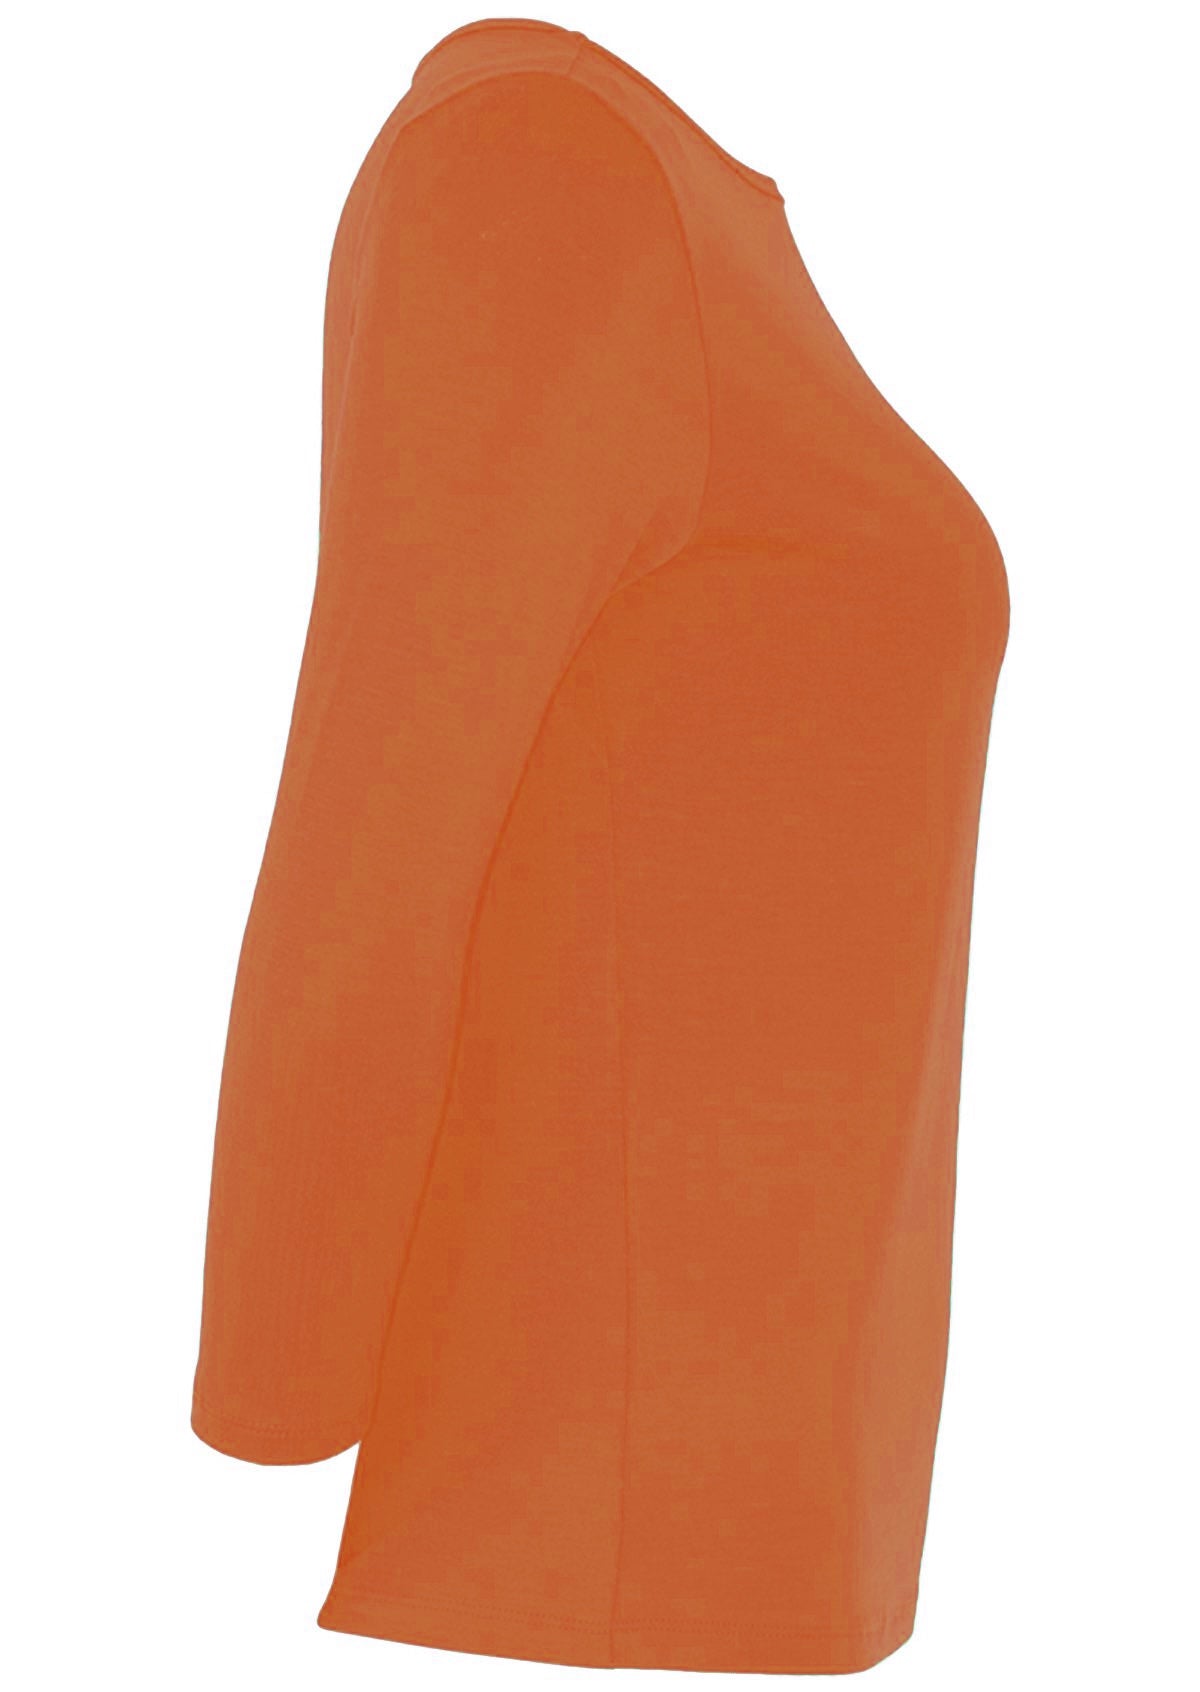 Side view of women's rayon boat neck orange 3/4 sleeve top.